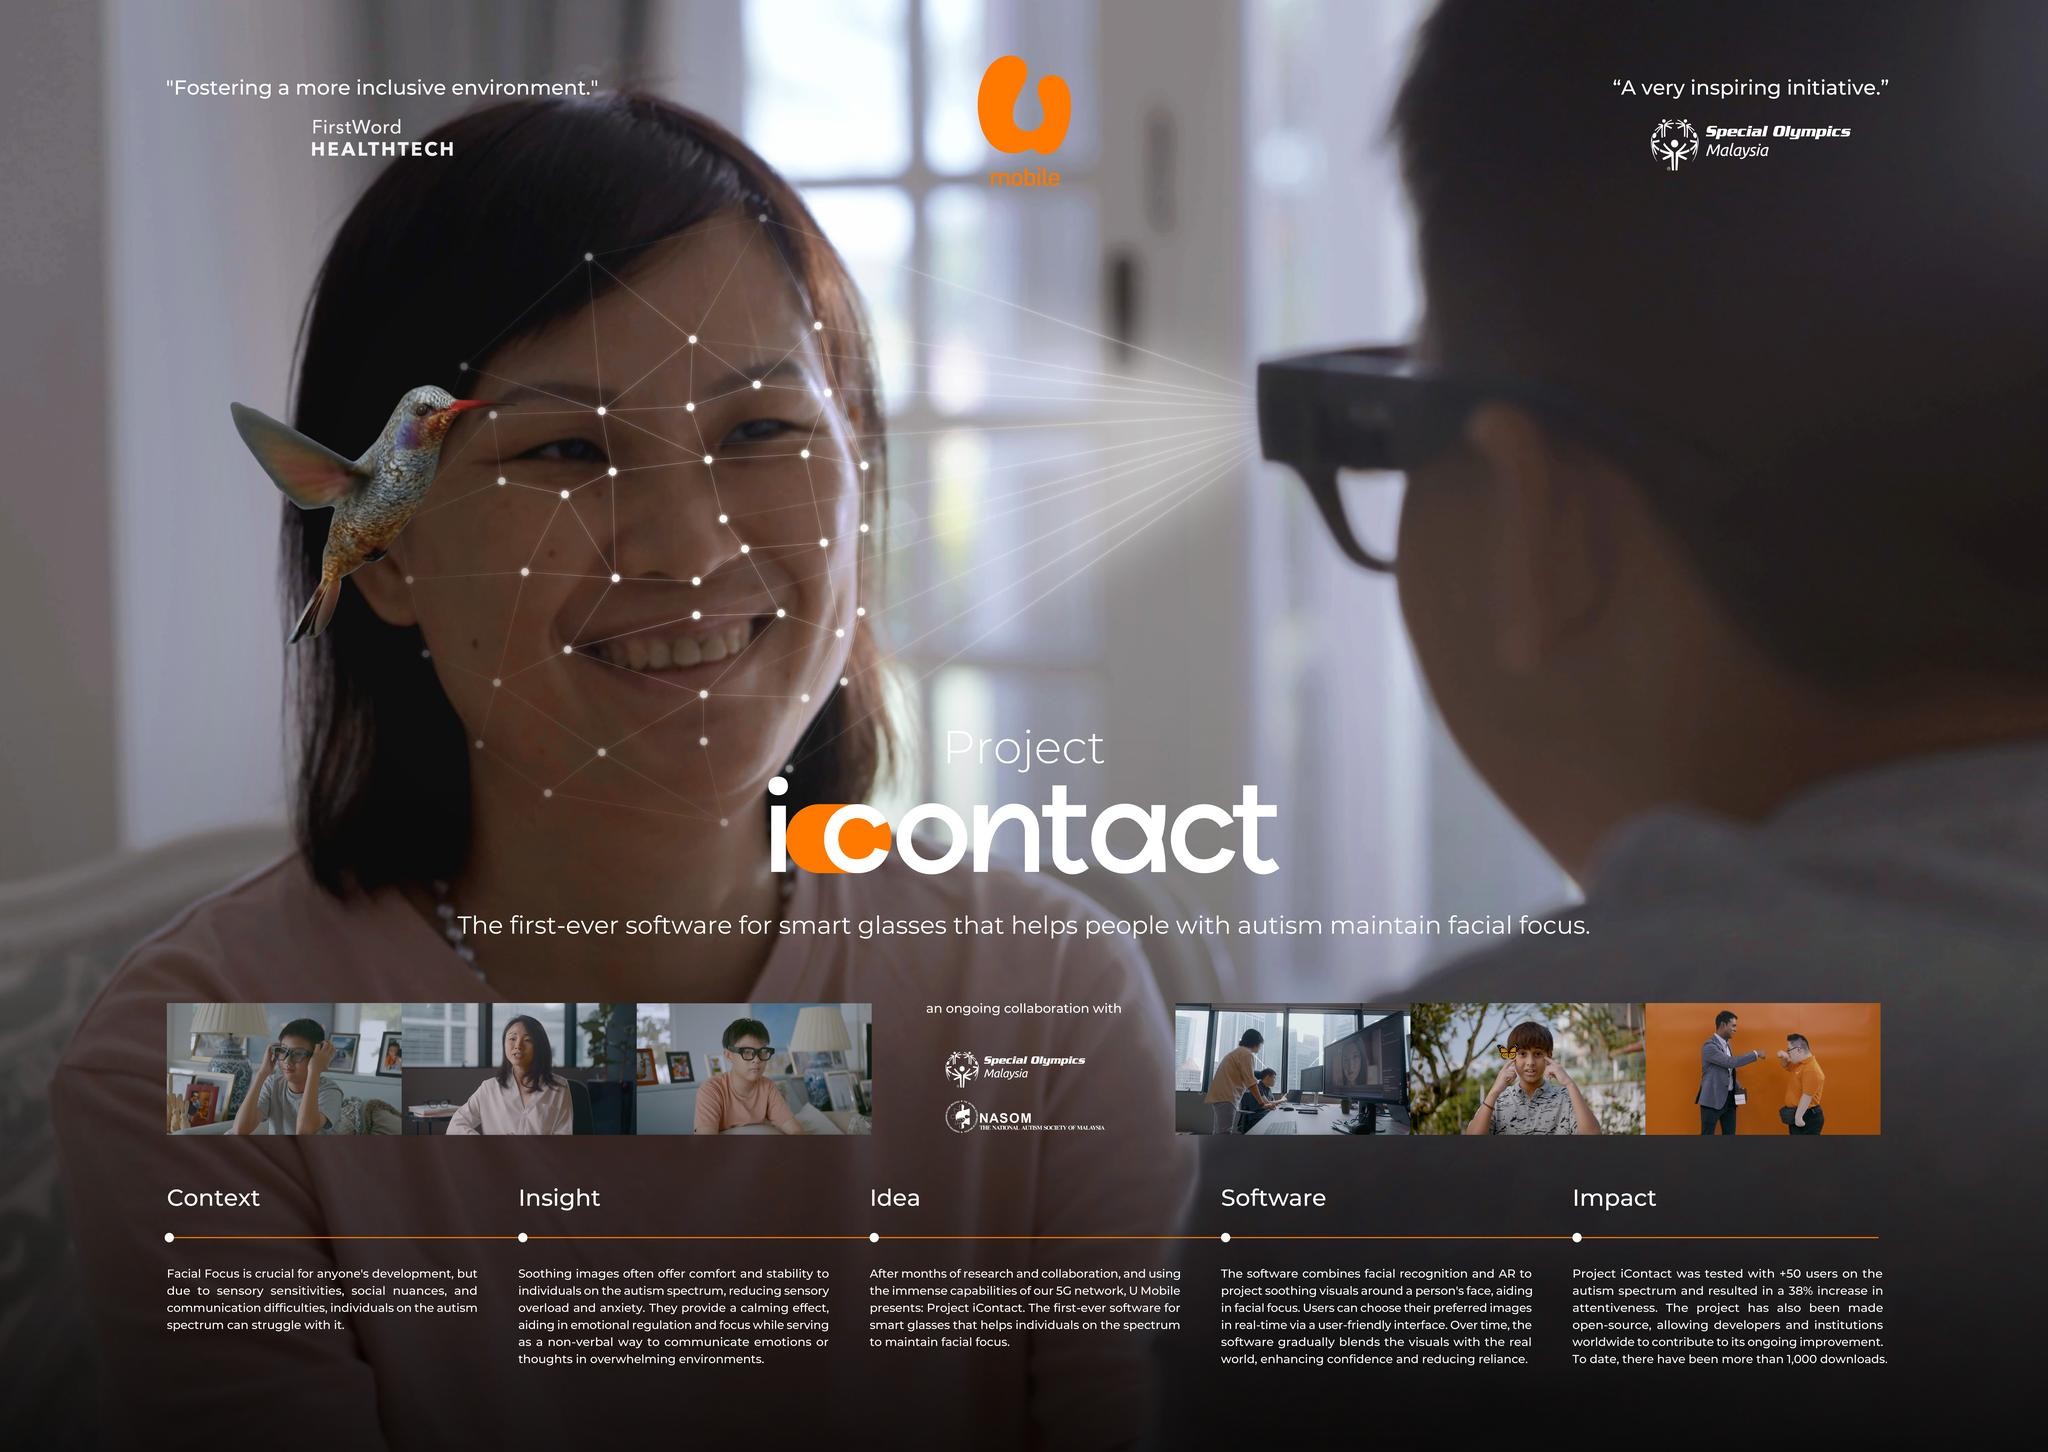 PROJECT ICONTACT